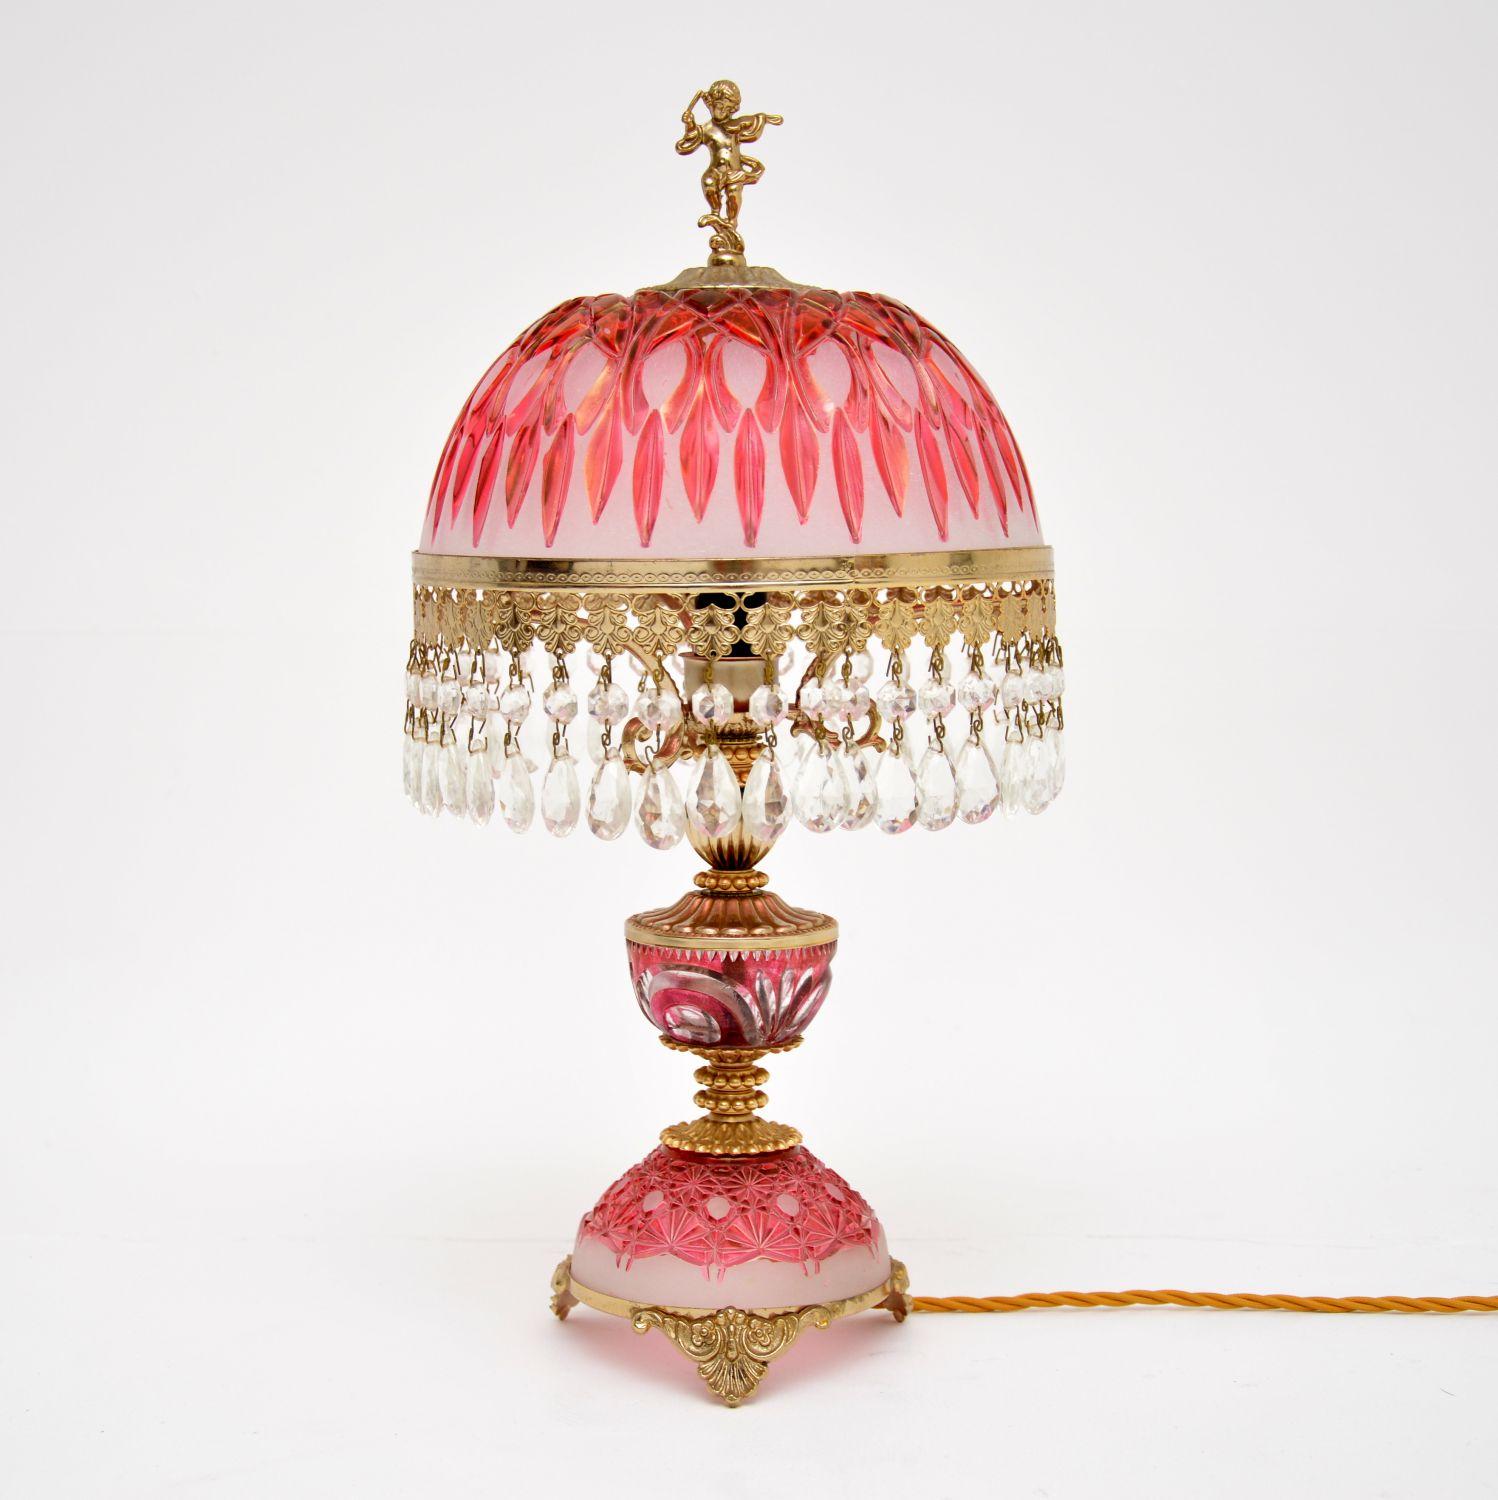 A stunning antique cut crystal glass table lamp dating from around the 1950’s period, which was made in France.

It is beautifully made, with gorgeous colours and patterns in the glass. There are also incredibly fine and detailed gilt metal